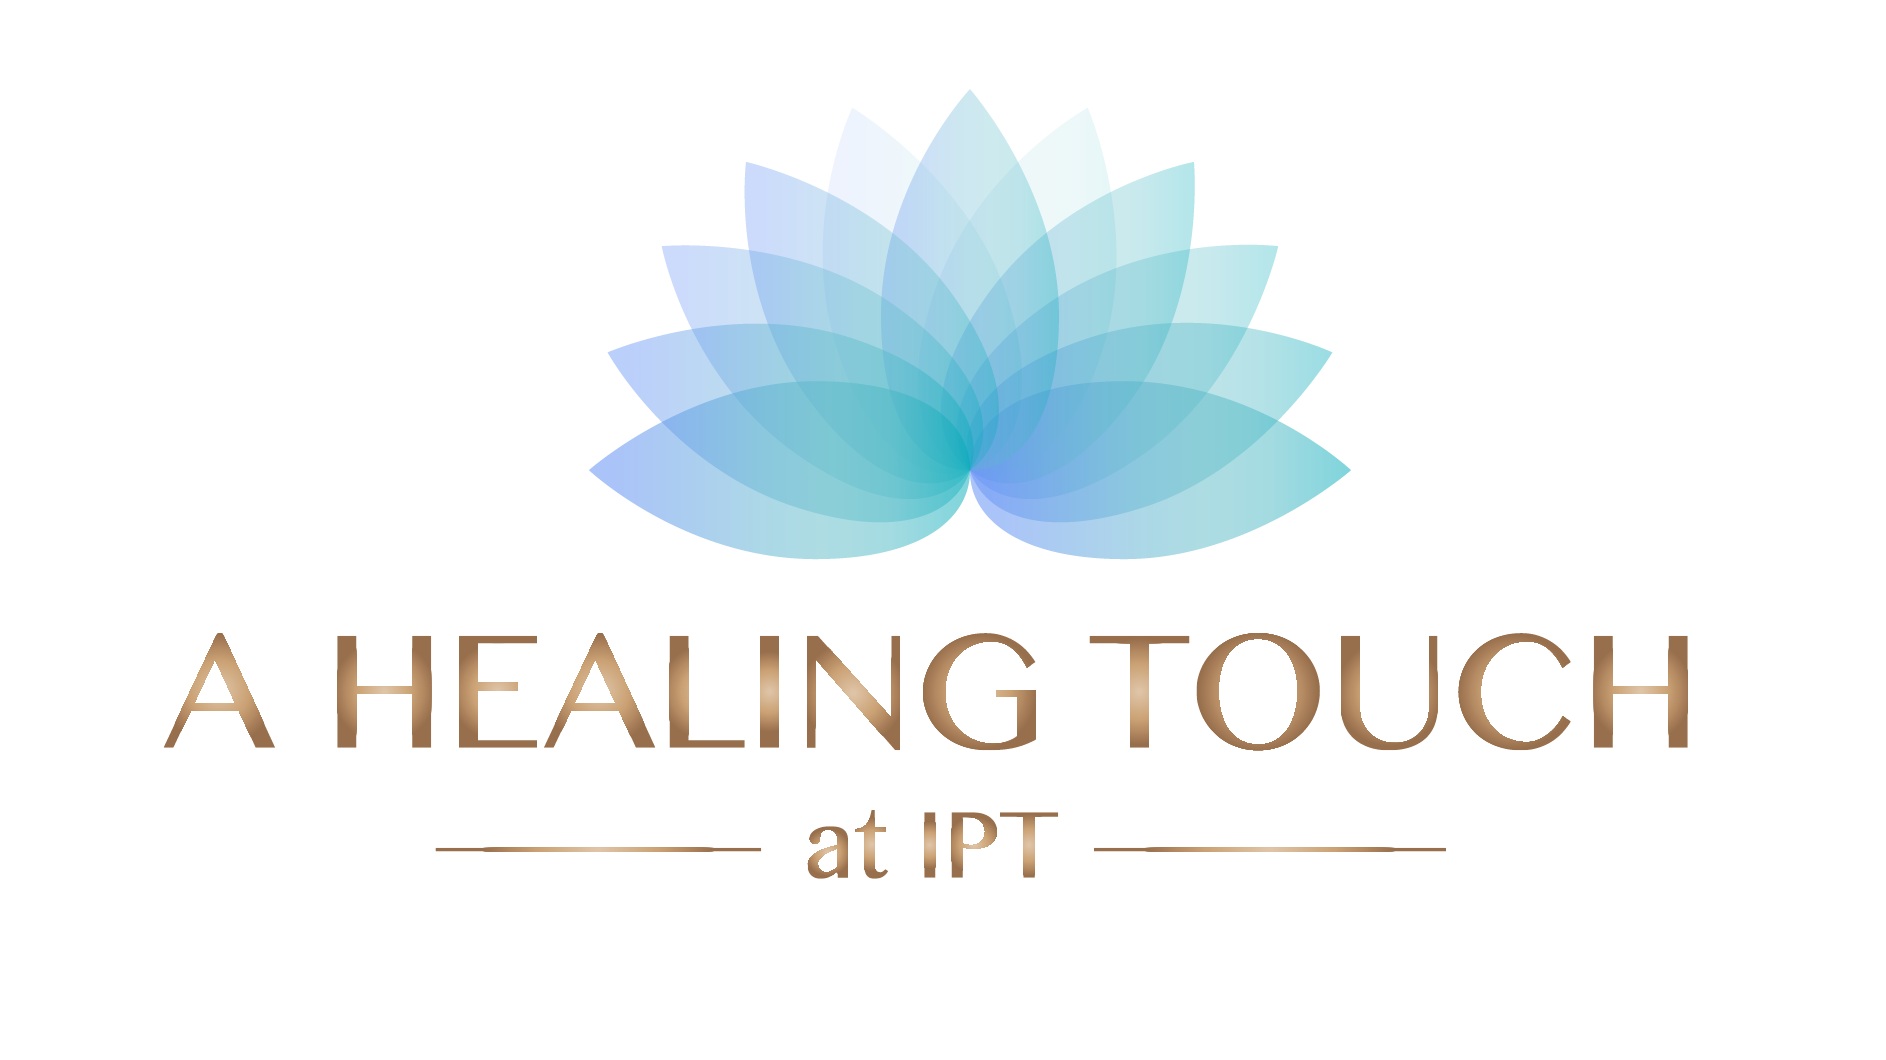 A Healing Touch at IPT | Natural and Organic Spa &amp; Salon Services | Howell, NJ